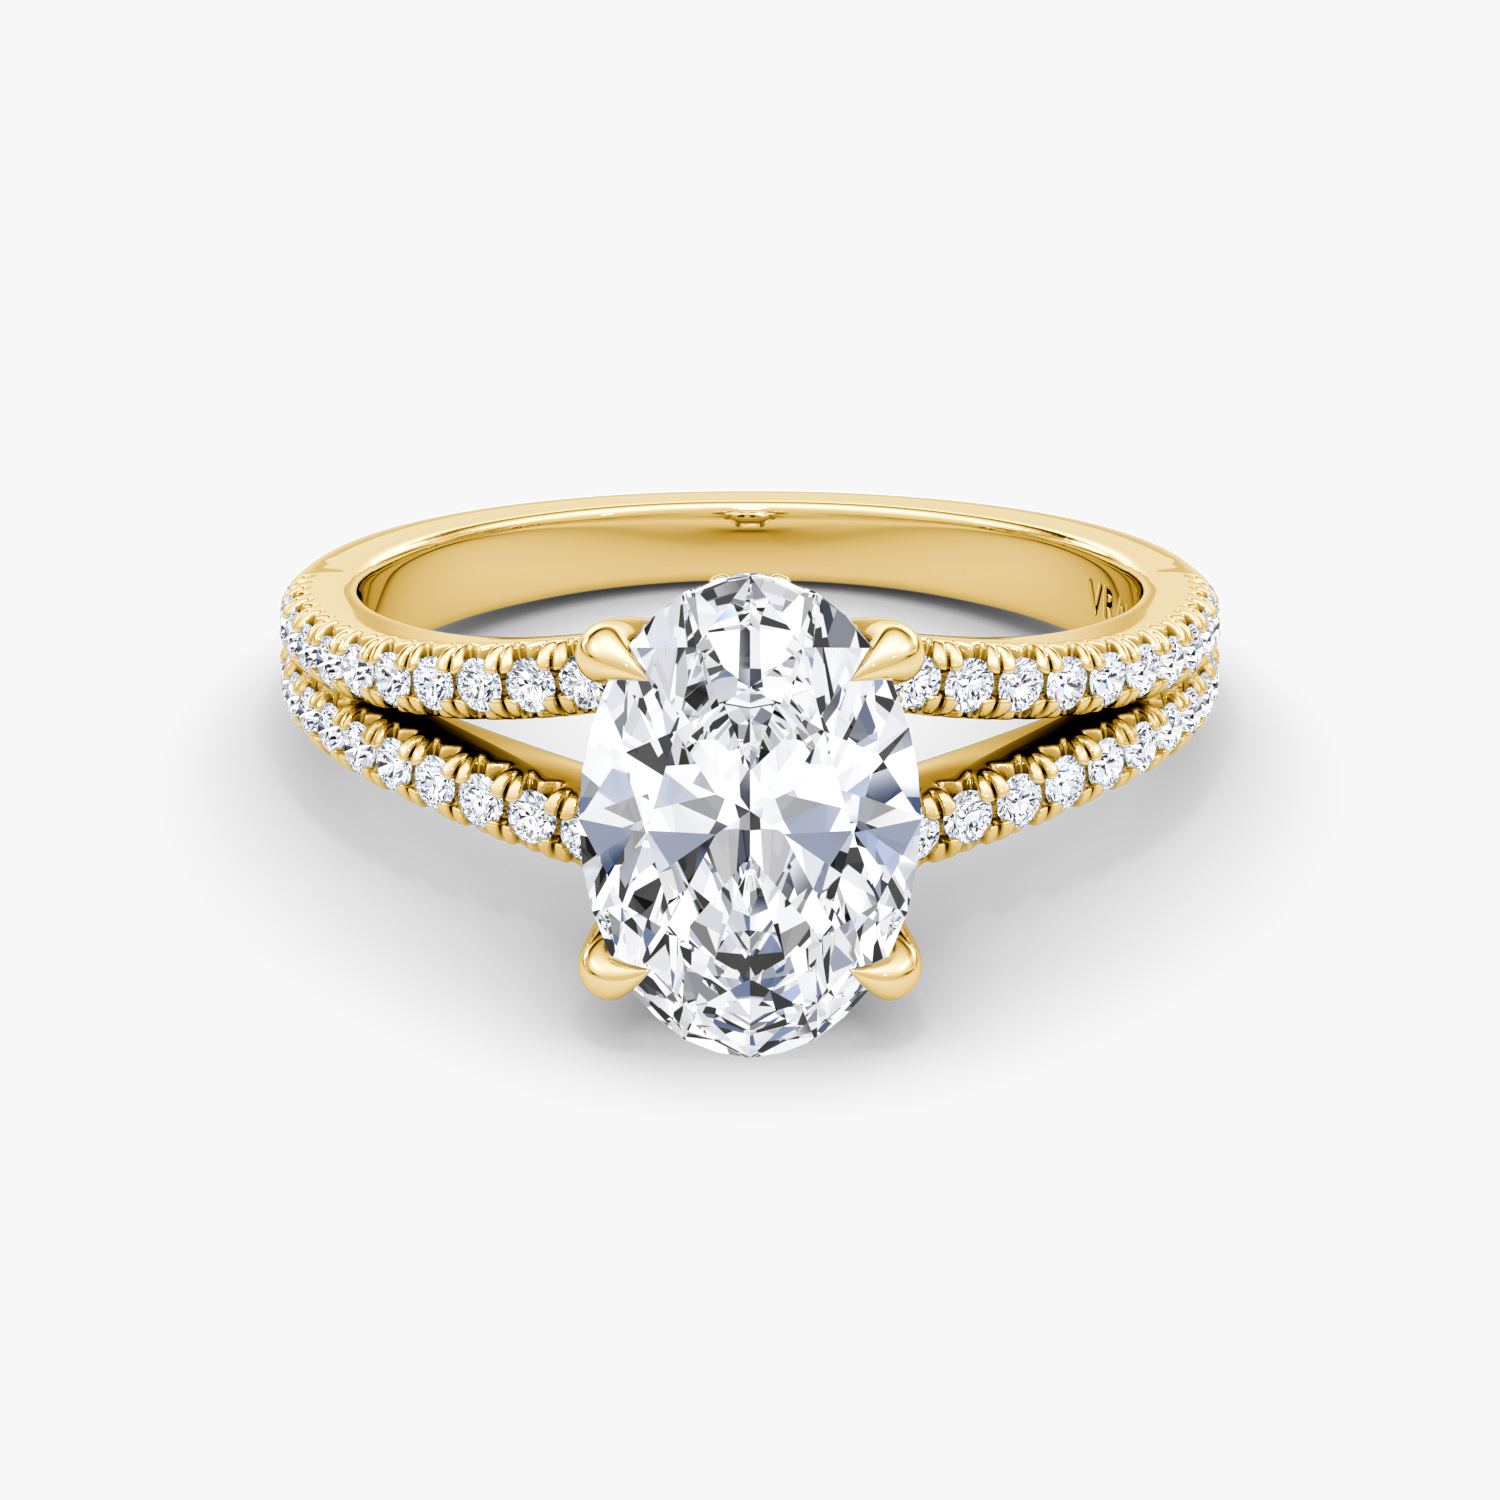 83 carat Marquise Diamond Halo Engagement Ring with Split Band | Lauren B  Jewelry